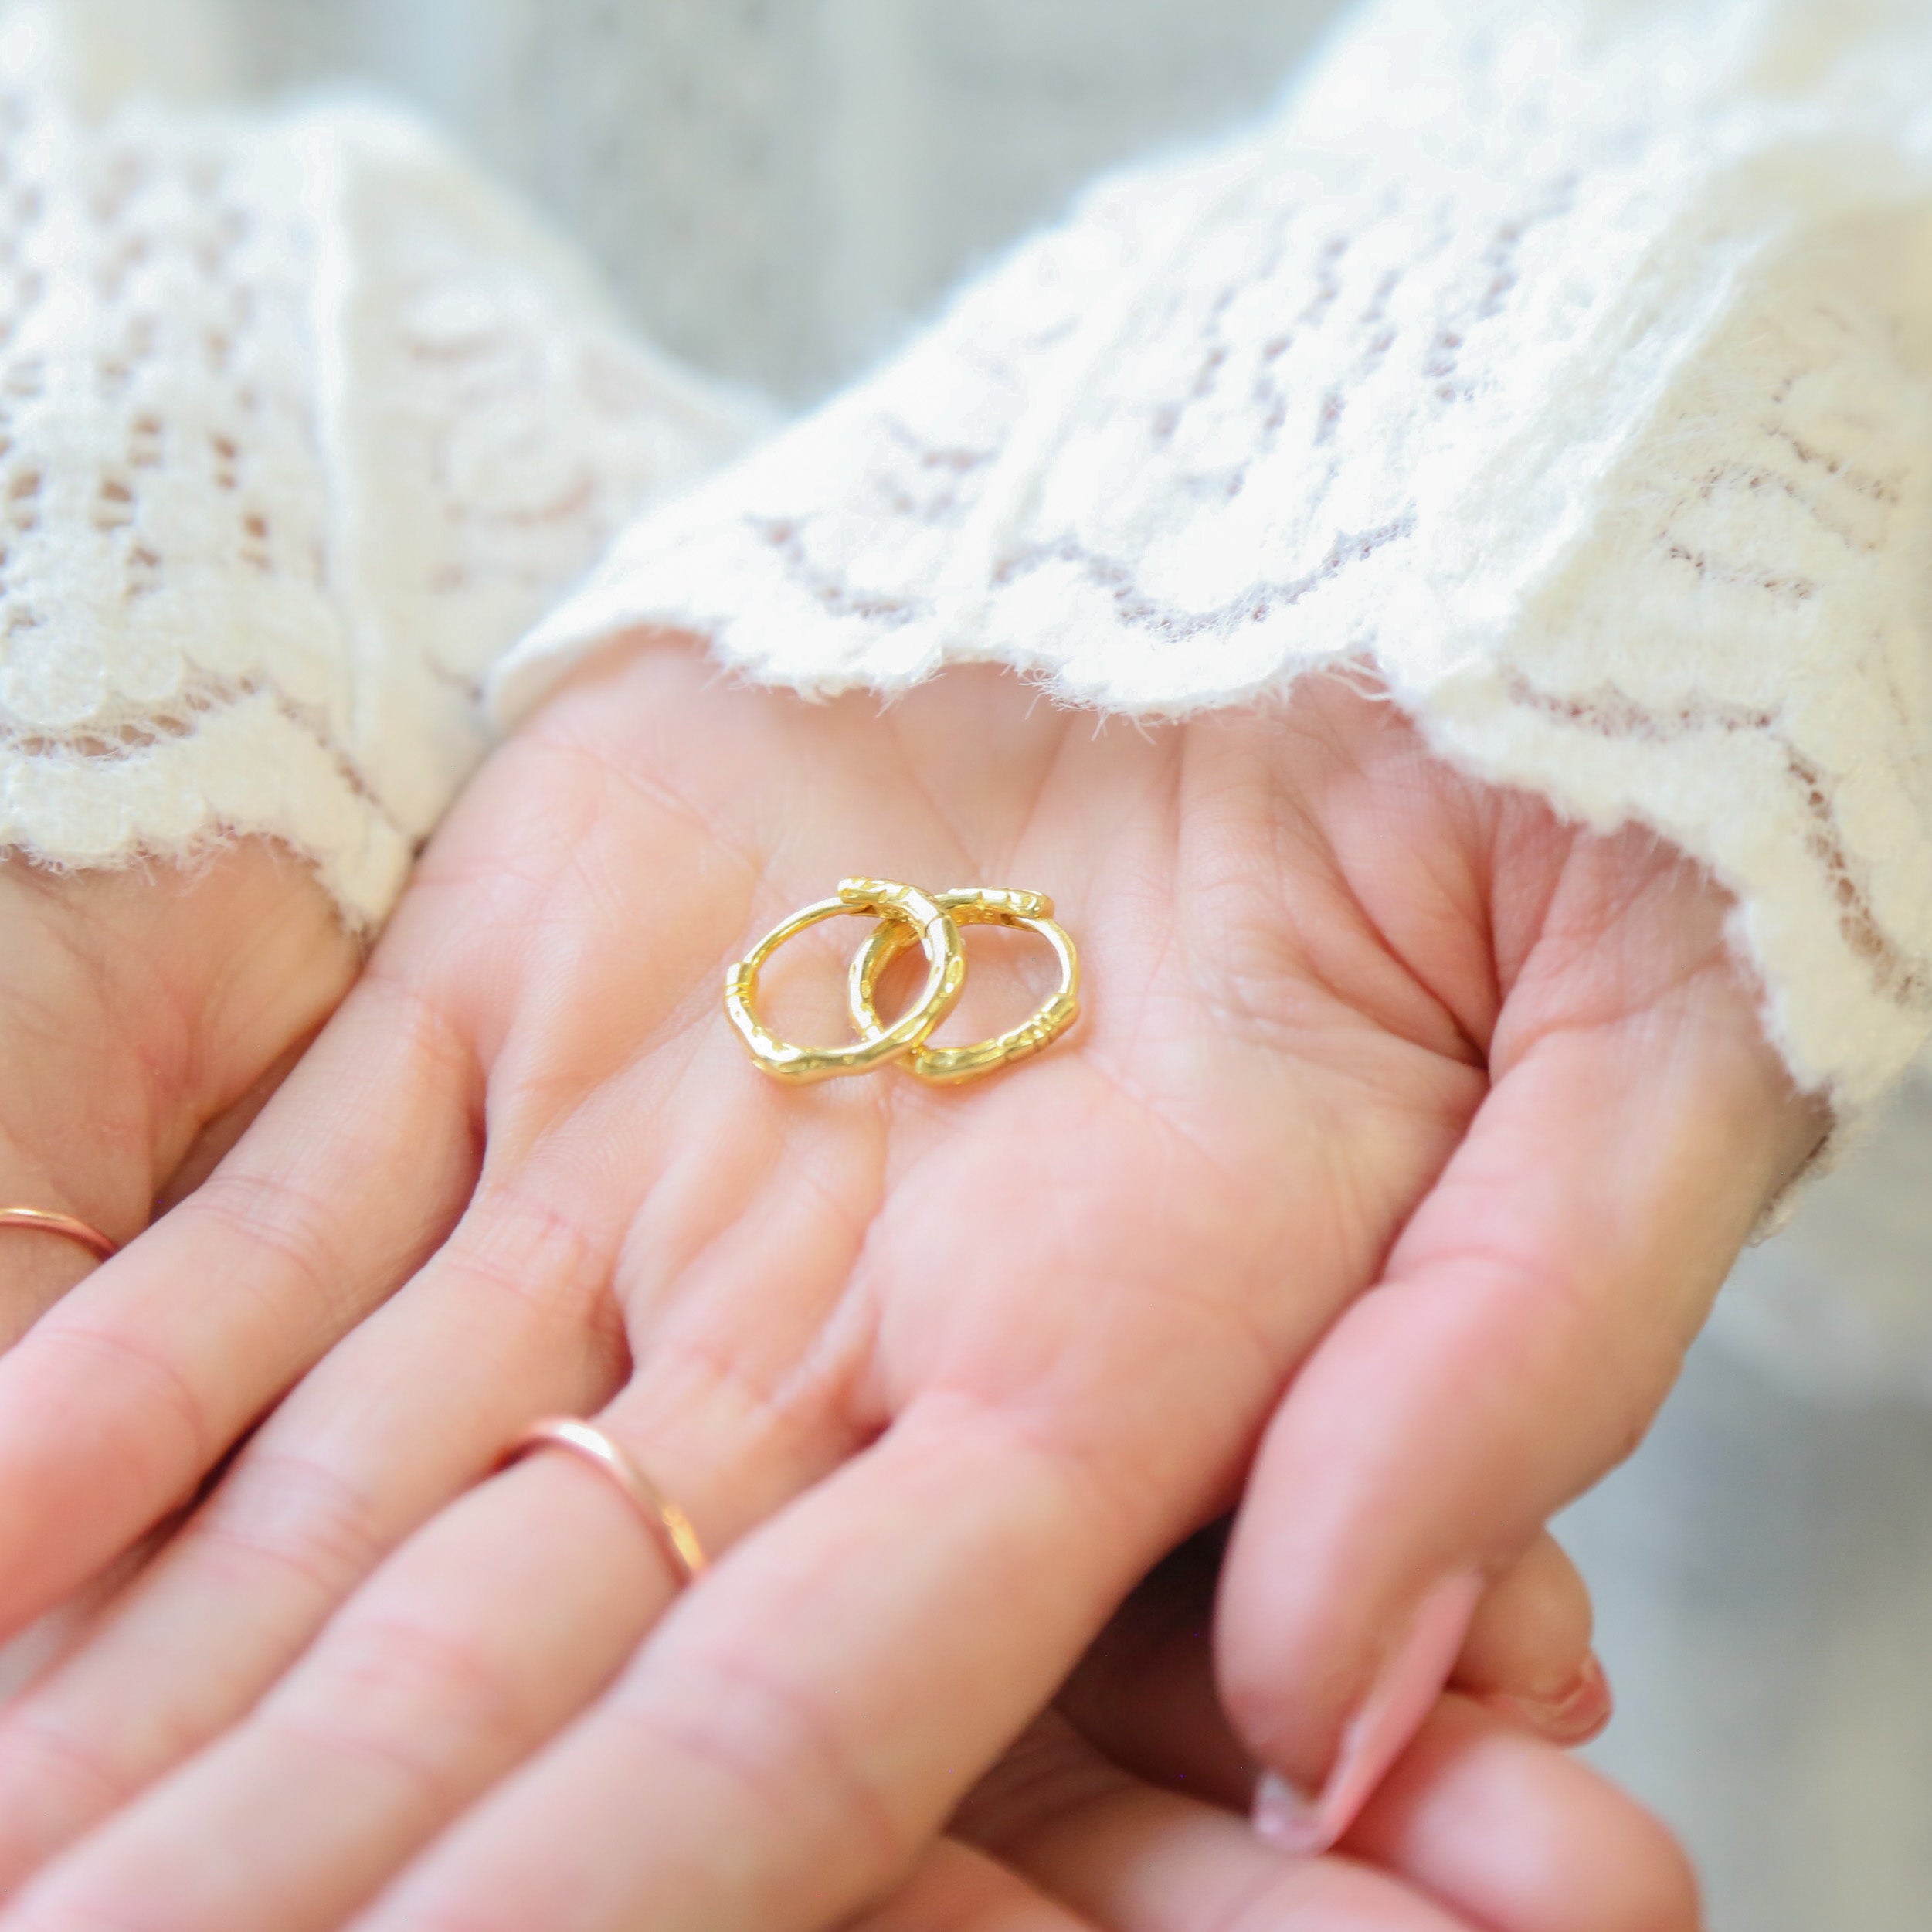 a person holding a pair of wedding rings in their hands